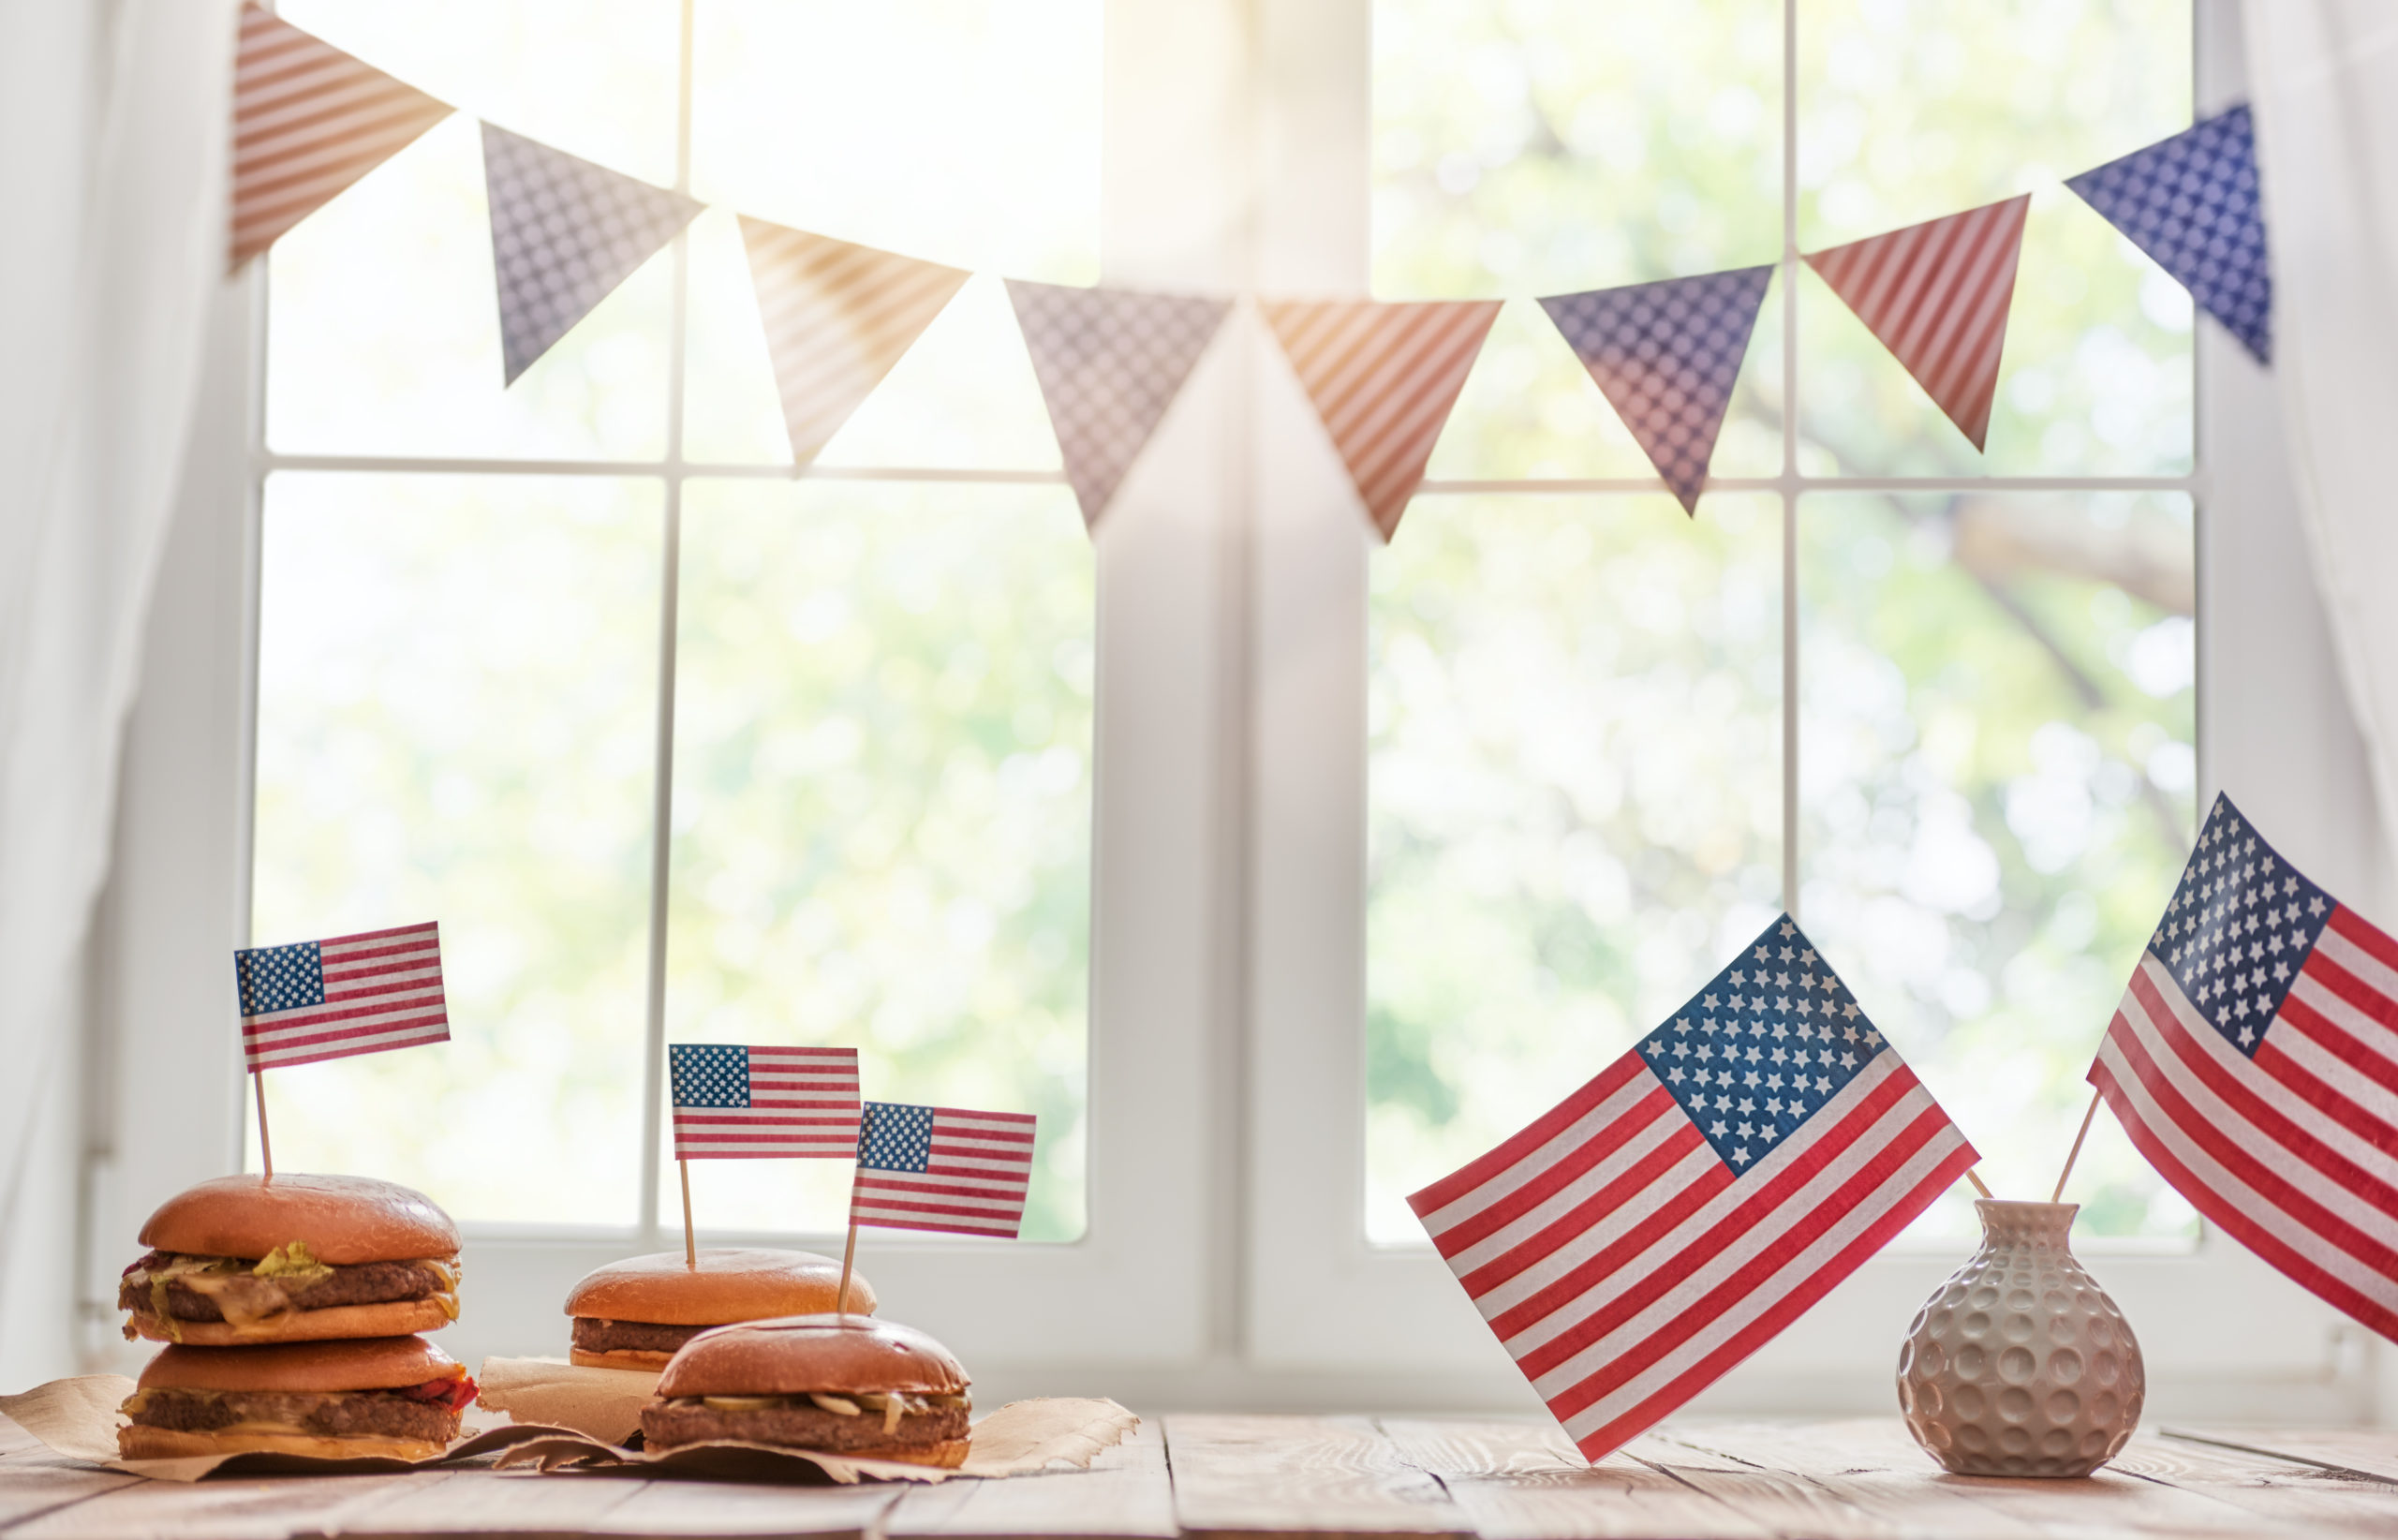 Various foods sit on a plate in a window with American flags sticking out. There is vase to the right also holding American flags and bunting above in read and blue.